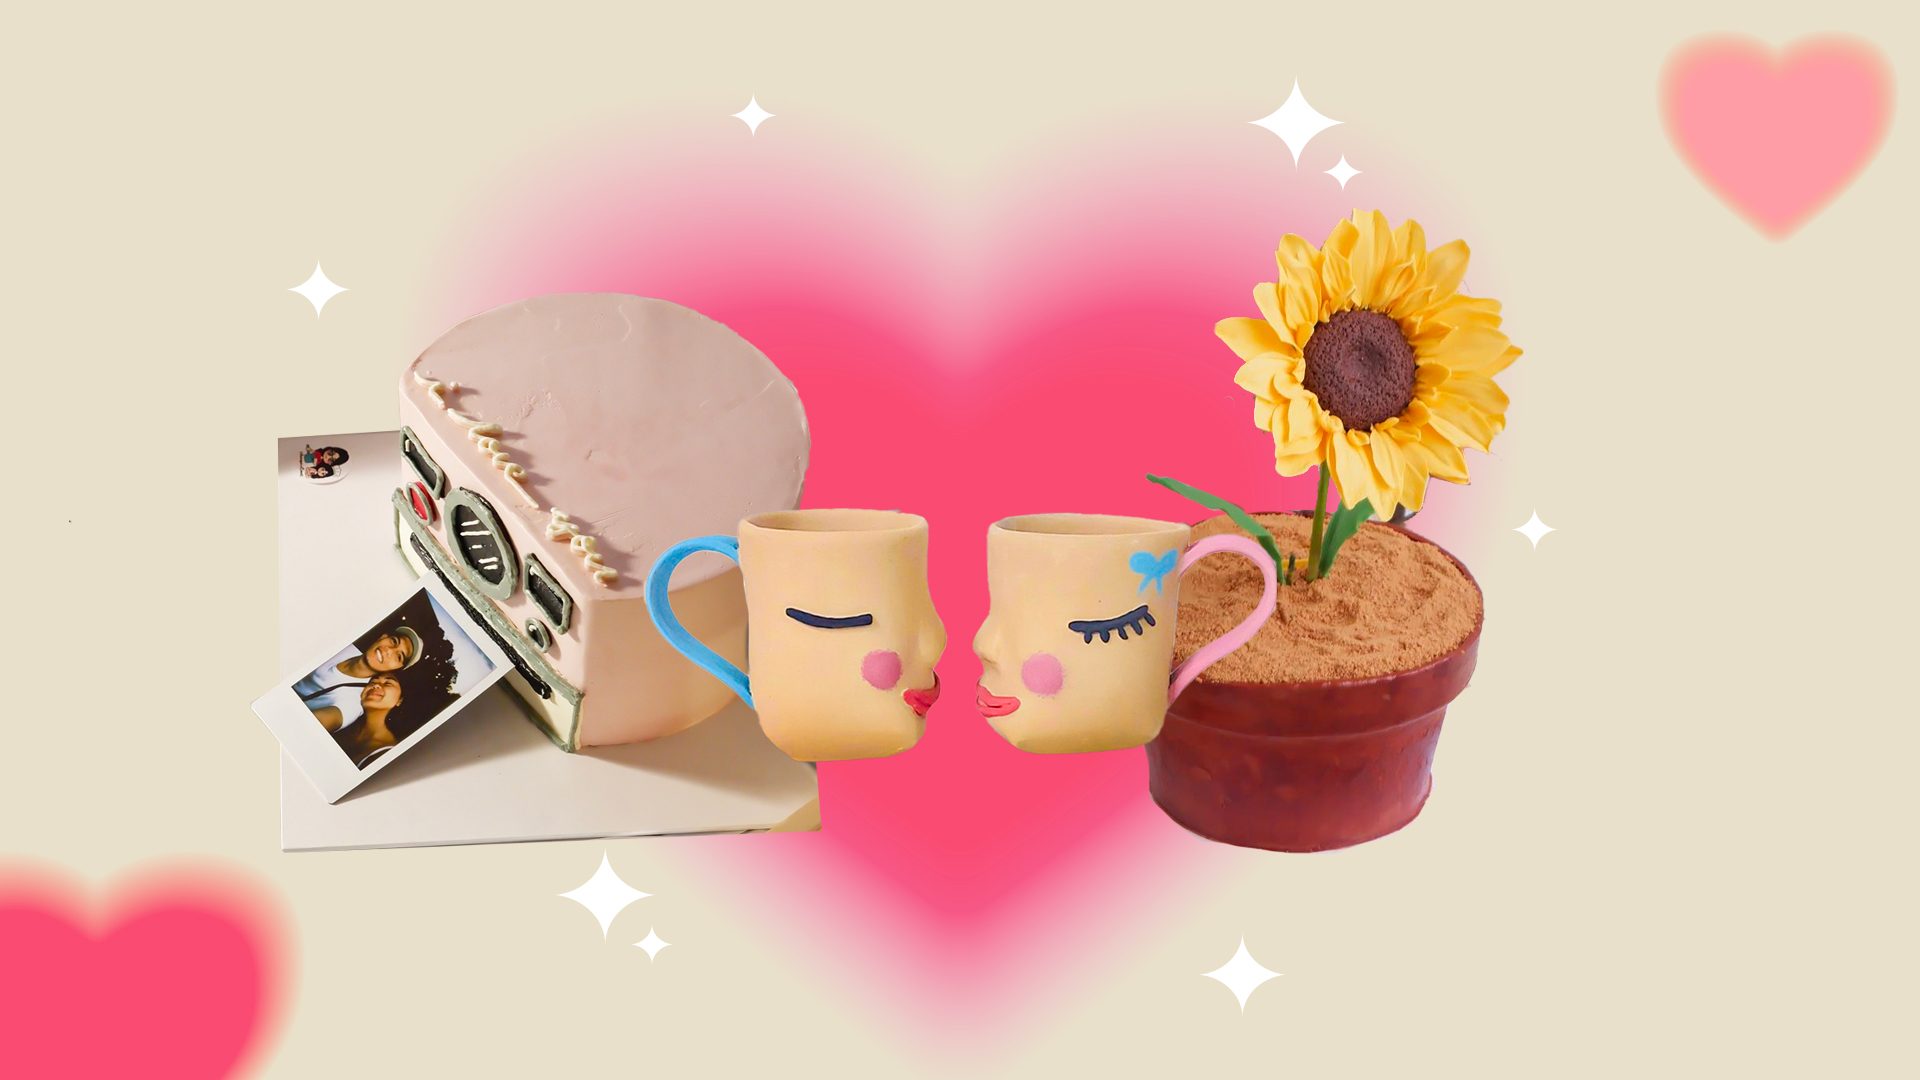 Spread the love with these last-minute Valentine’s Day food gifts, date ideas